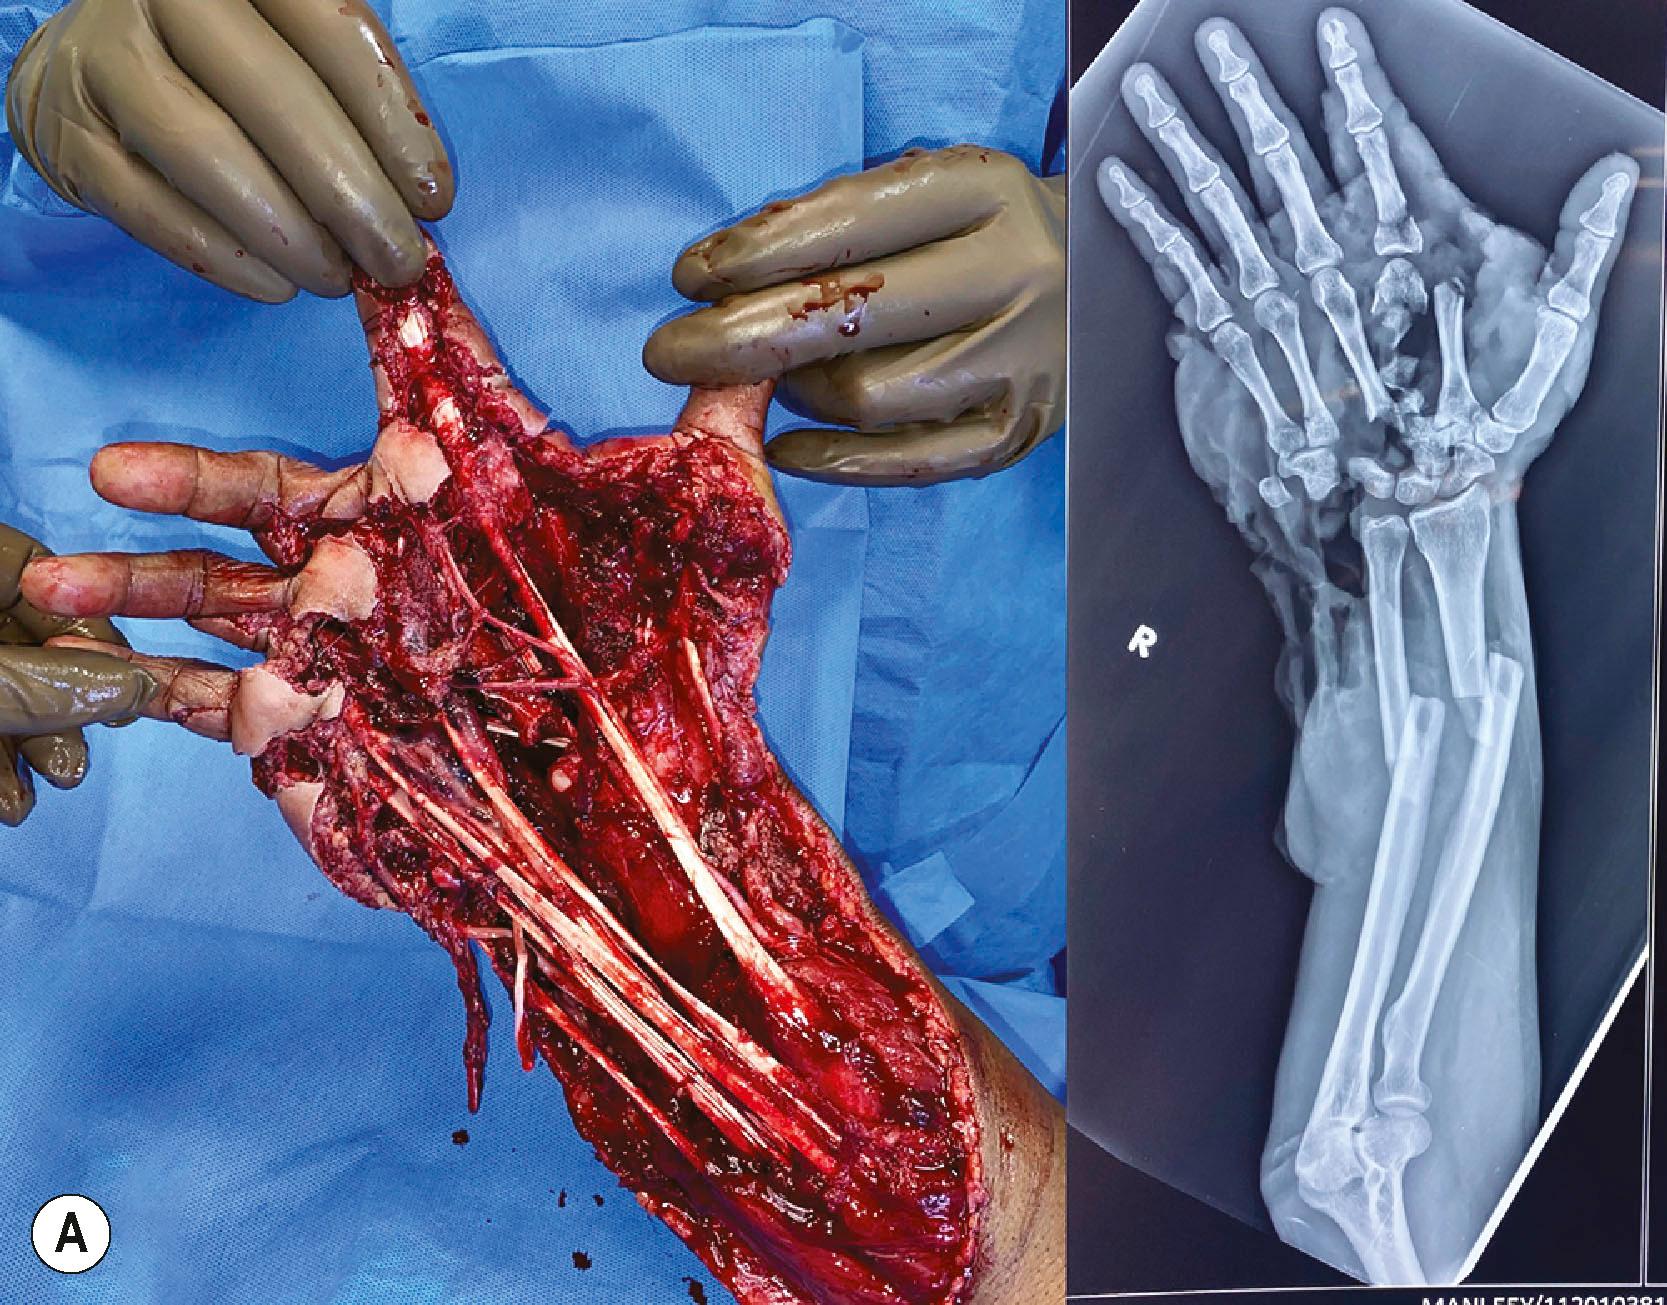 Figure 12.9, (A) Major crush injury to the hand and forearm, with radiograph taken with traction after an on−arrival block. (B) The distal part is avascular and a flow−through flap was planned. (C) The arterial anatomy and the anastomosis performed: white arrow points to the anastomosis of the flap artery to the proximal ulnar artery, the stars show the vessels to the flap, and the black arrow shows the artery to the rectus anastomosed to the distal ulnar artery to reconstruct the ulnar vessels. (D) The flap being inset. (E) The well−healed flap and a vascular hand.